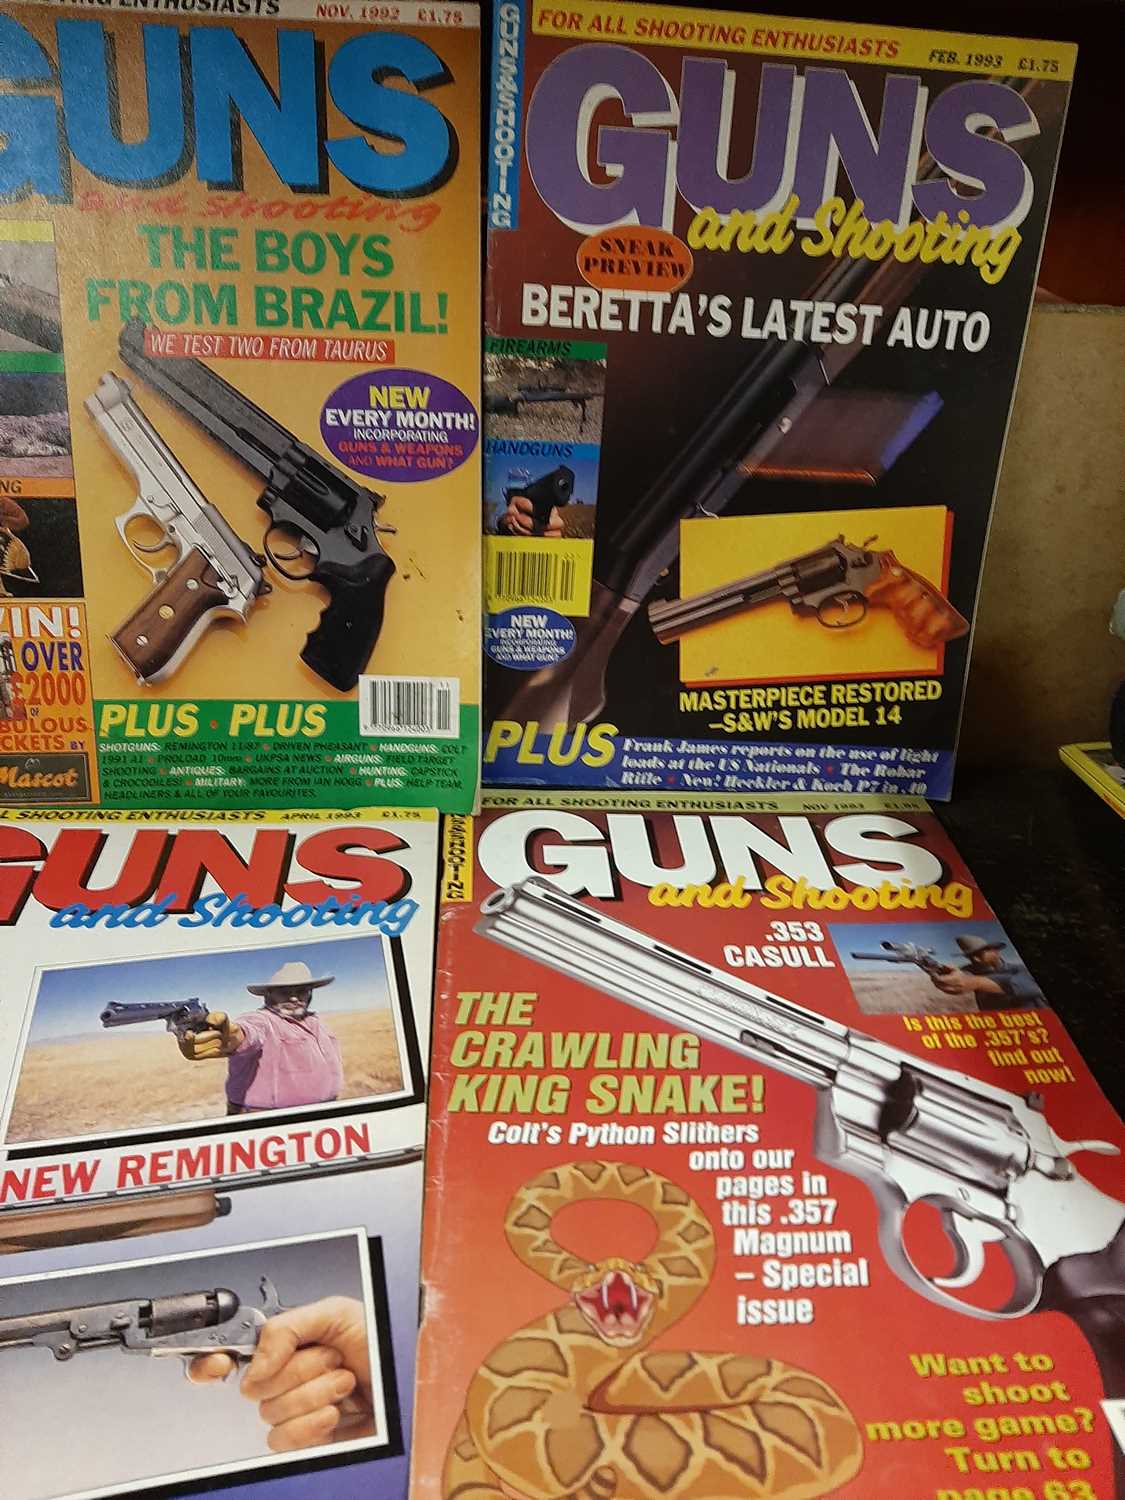 10 large format books and 8 magazines related to guns and shooting [our ref: 283] - Image 2 of 3